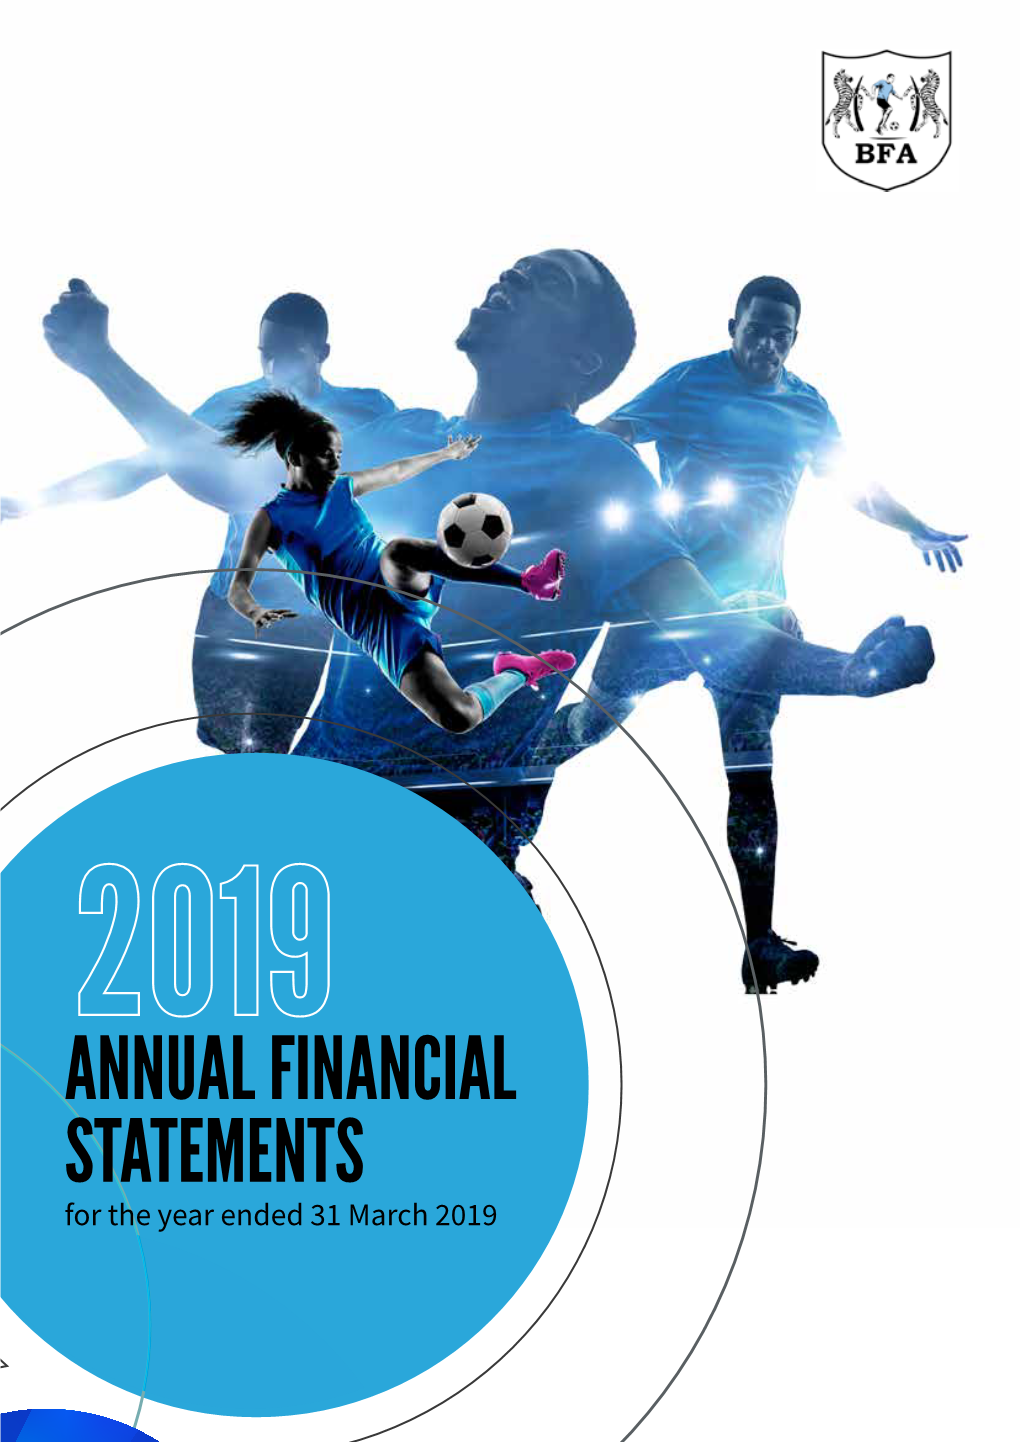 ANNUAL FINANCIAL STATEMENTS for the Year Ended 31 March 2019 BOTSWANA FOOTBALL ASSOCIATION FINANCIAL REPORT 2019